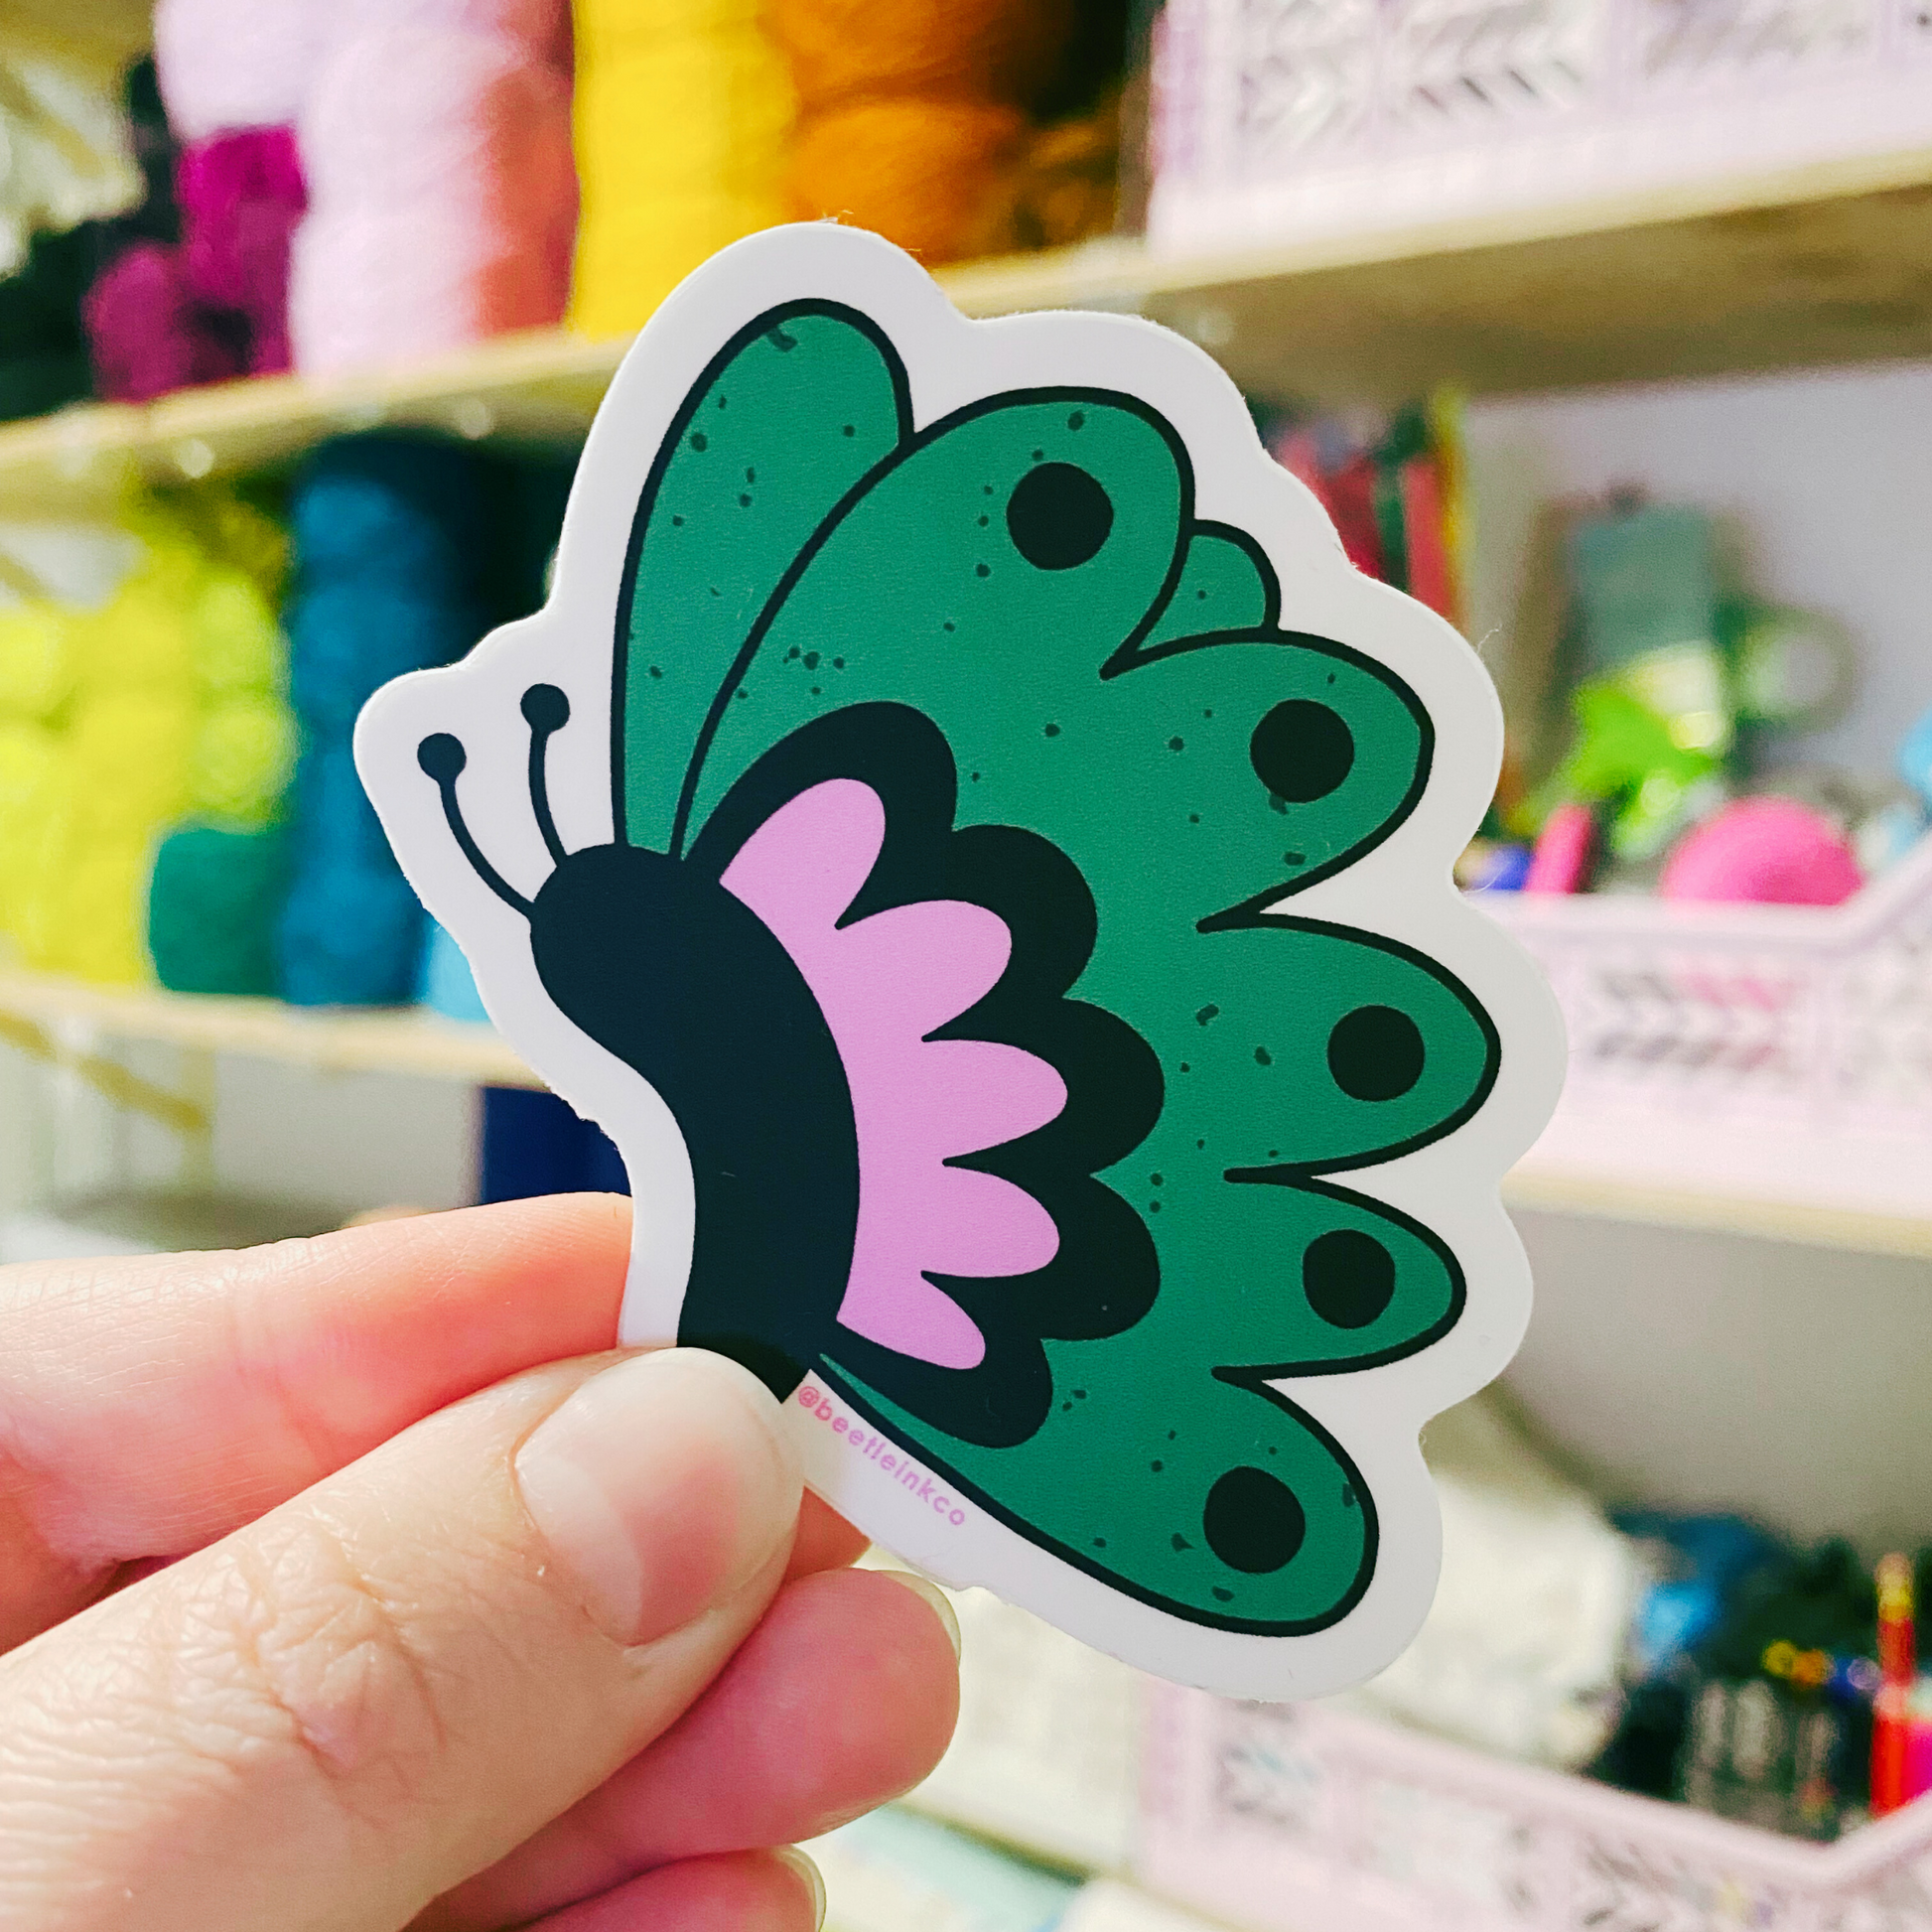 The artist holds up a hand drawn vinyl sticker in the shape of a fluttering butterfly, in her art studio.